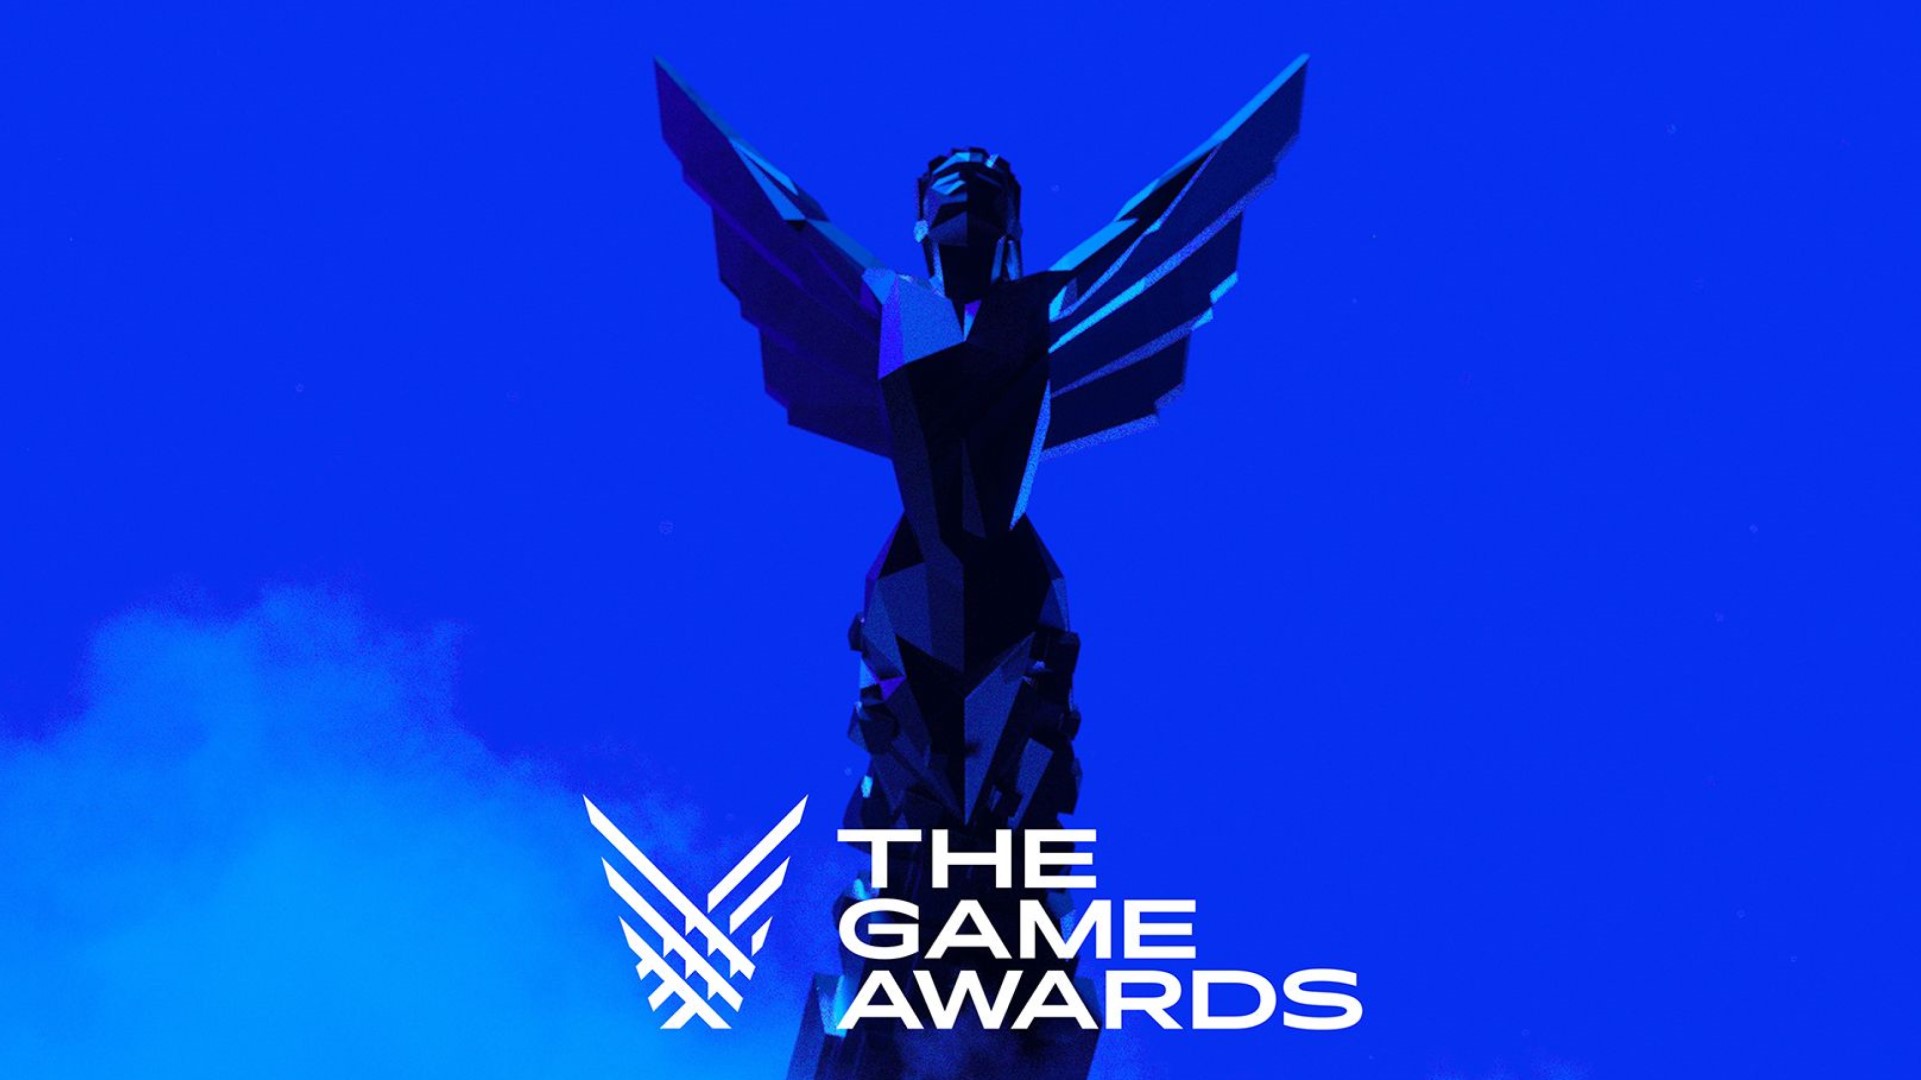 Game Awards 2021 and AMD are doing a big giveaway - Games, Gaming